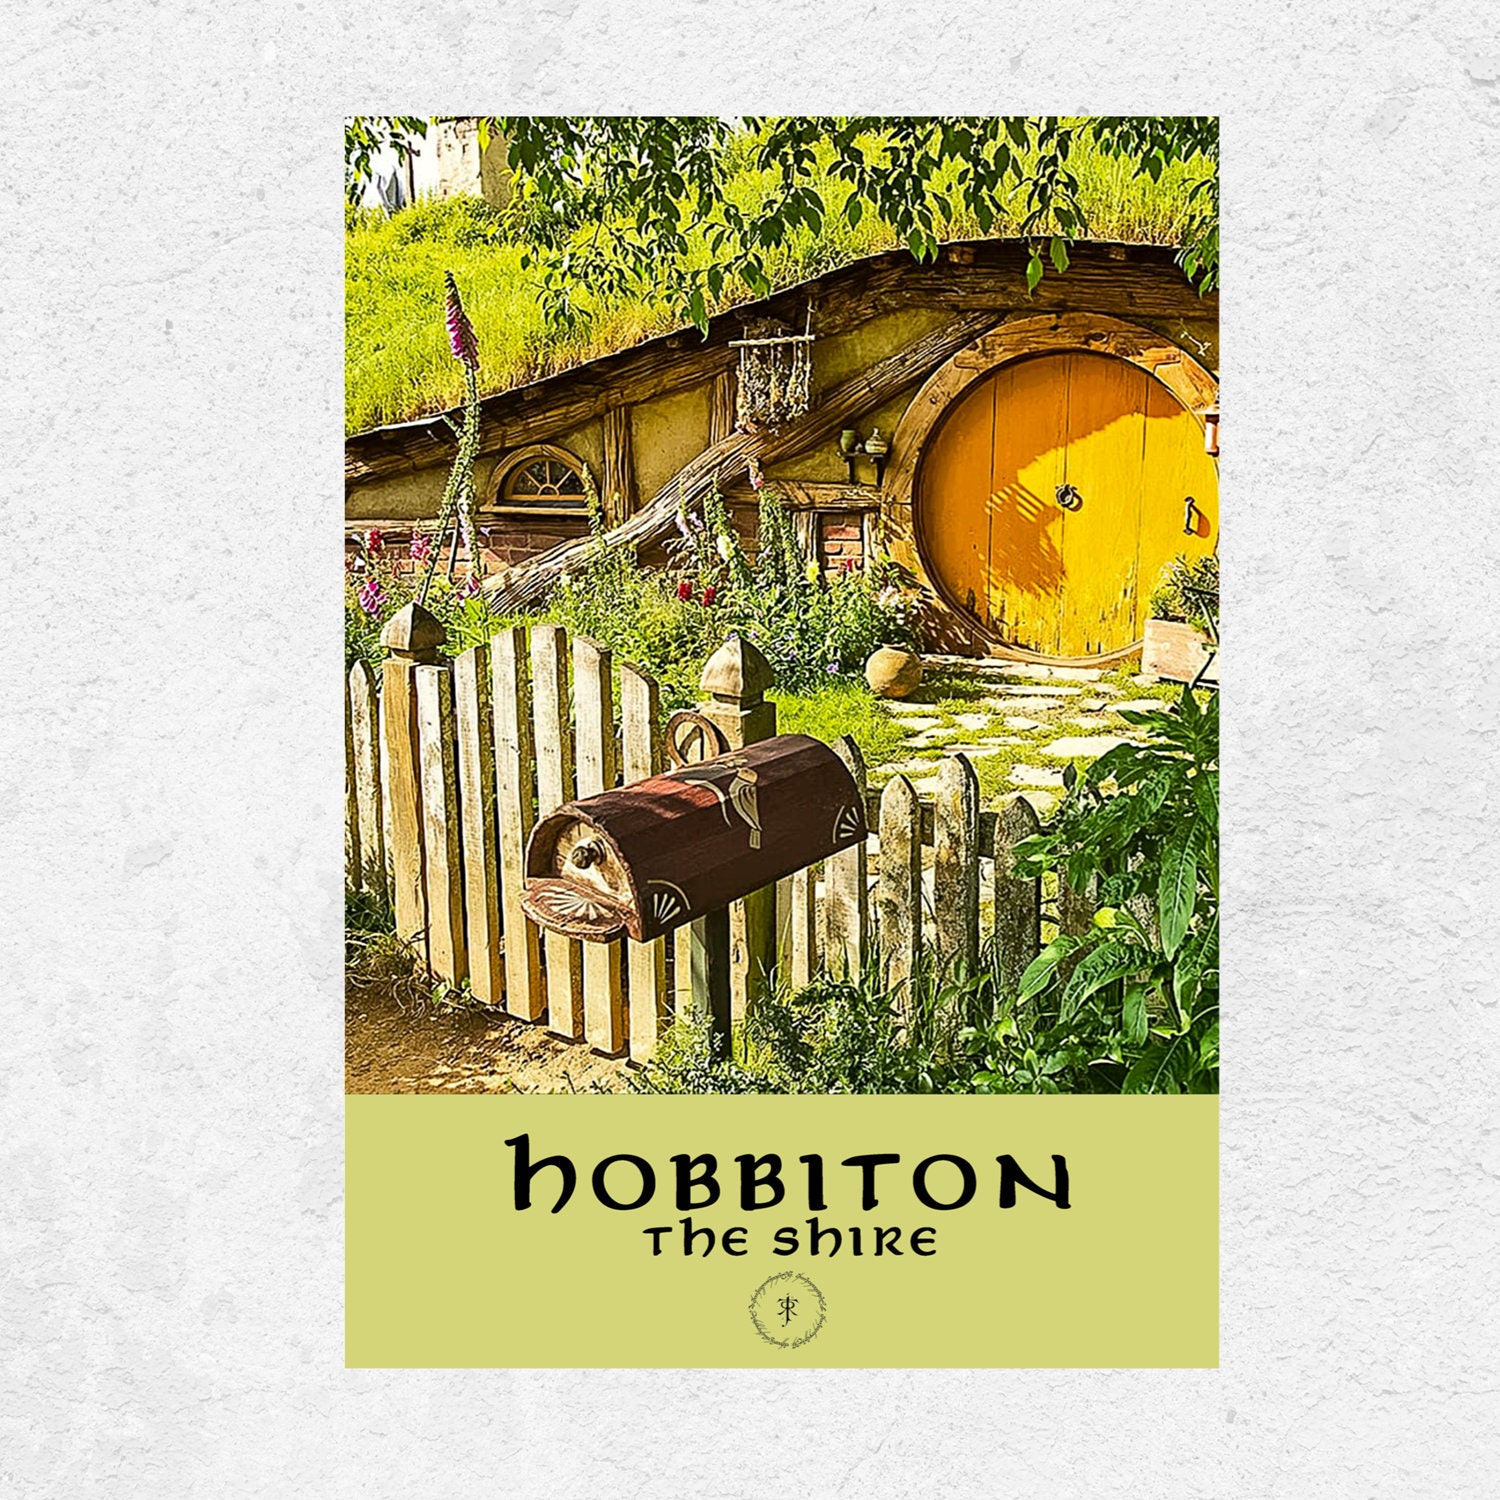 Rustic Hobbit Hole of the Shire Map Hobbiton Art Decor, Lord of the Ring  Hobbit Hole Art Poster, Decor, Wall Art, Gift, Instant Download 